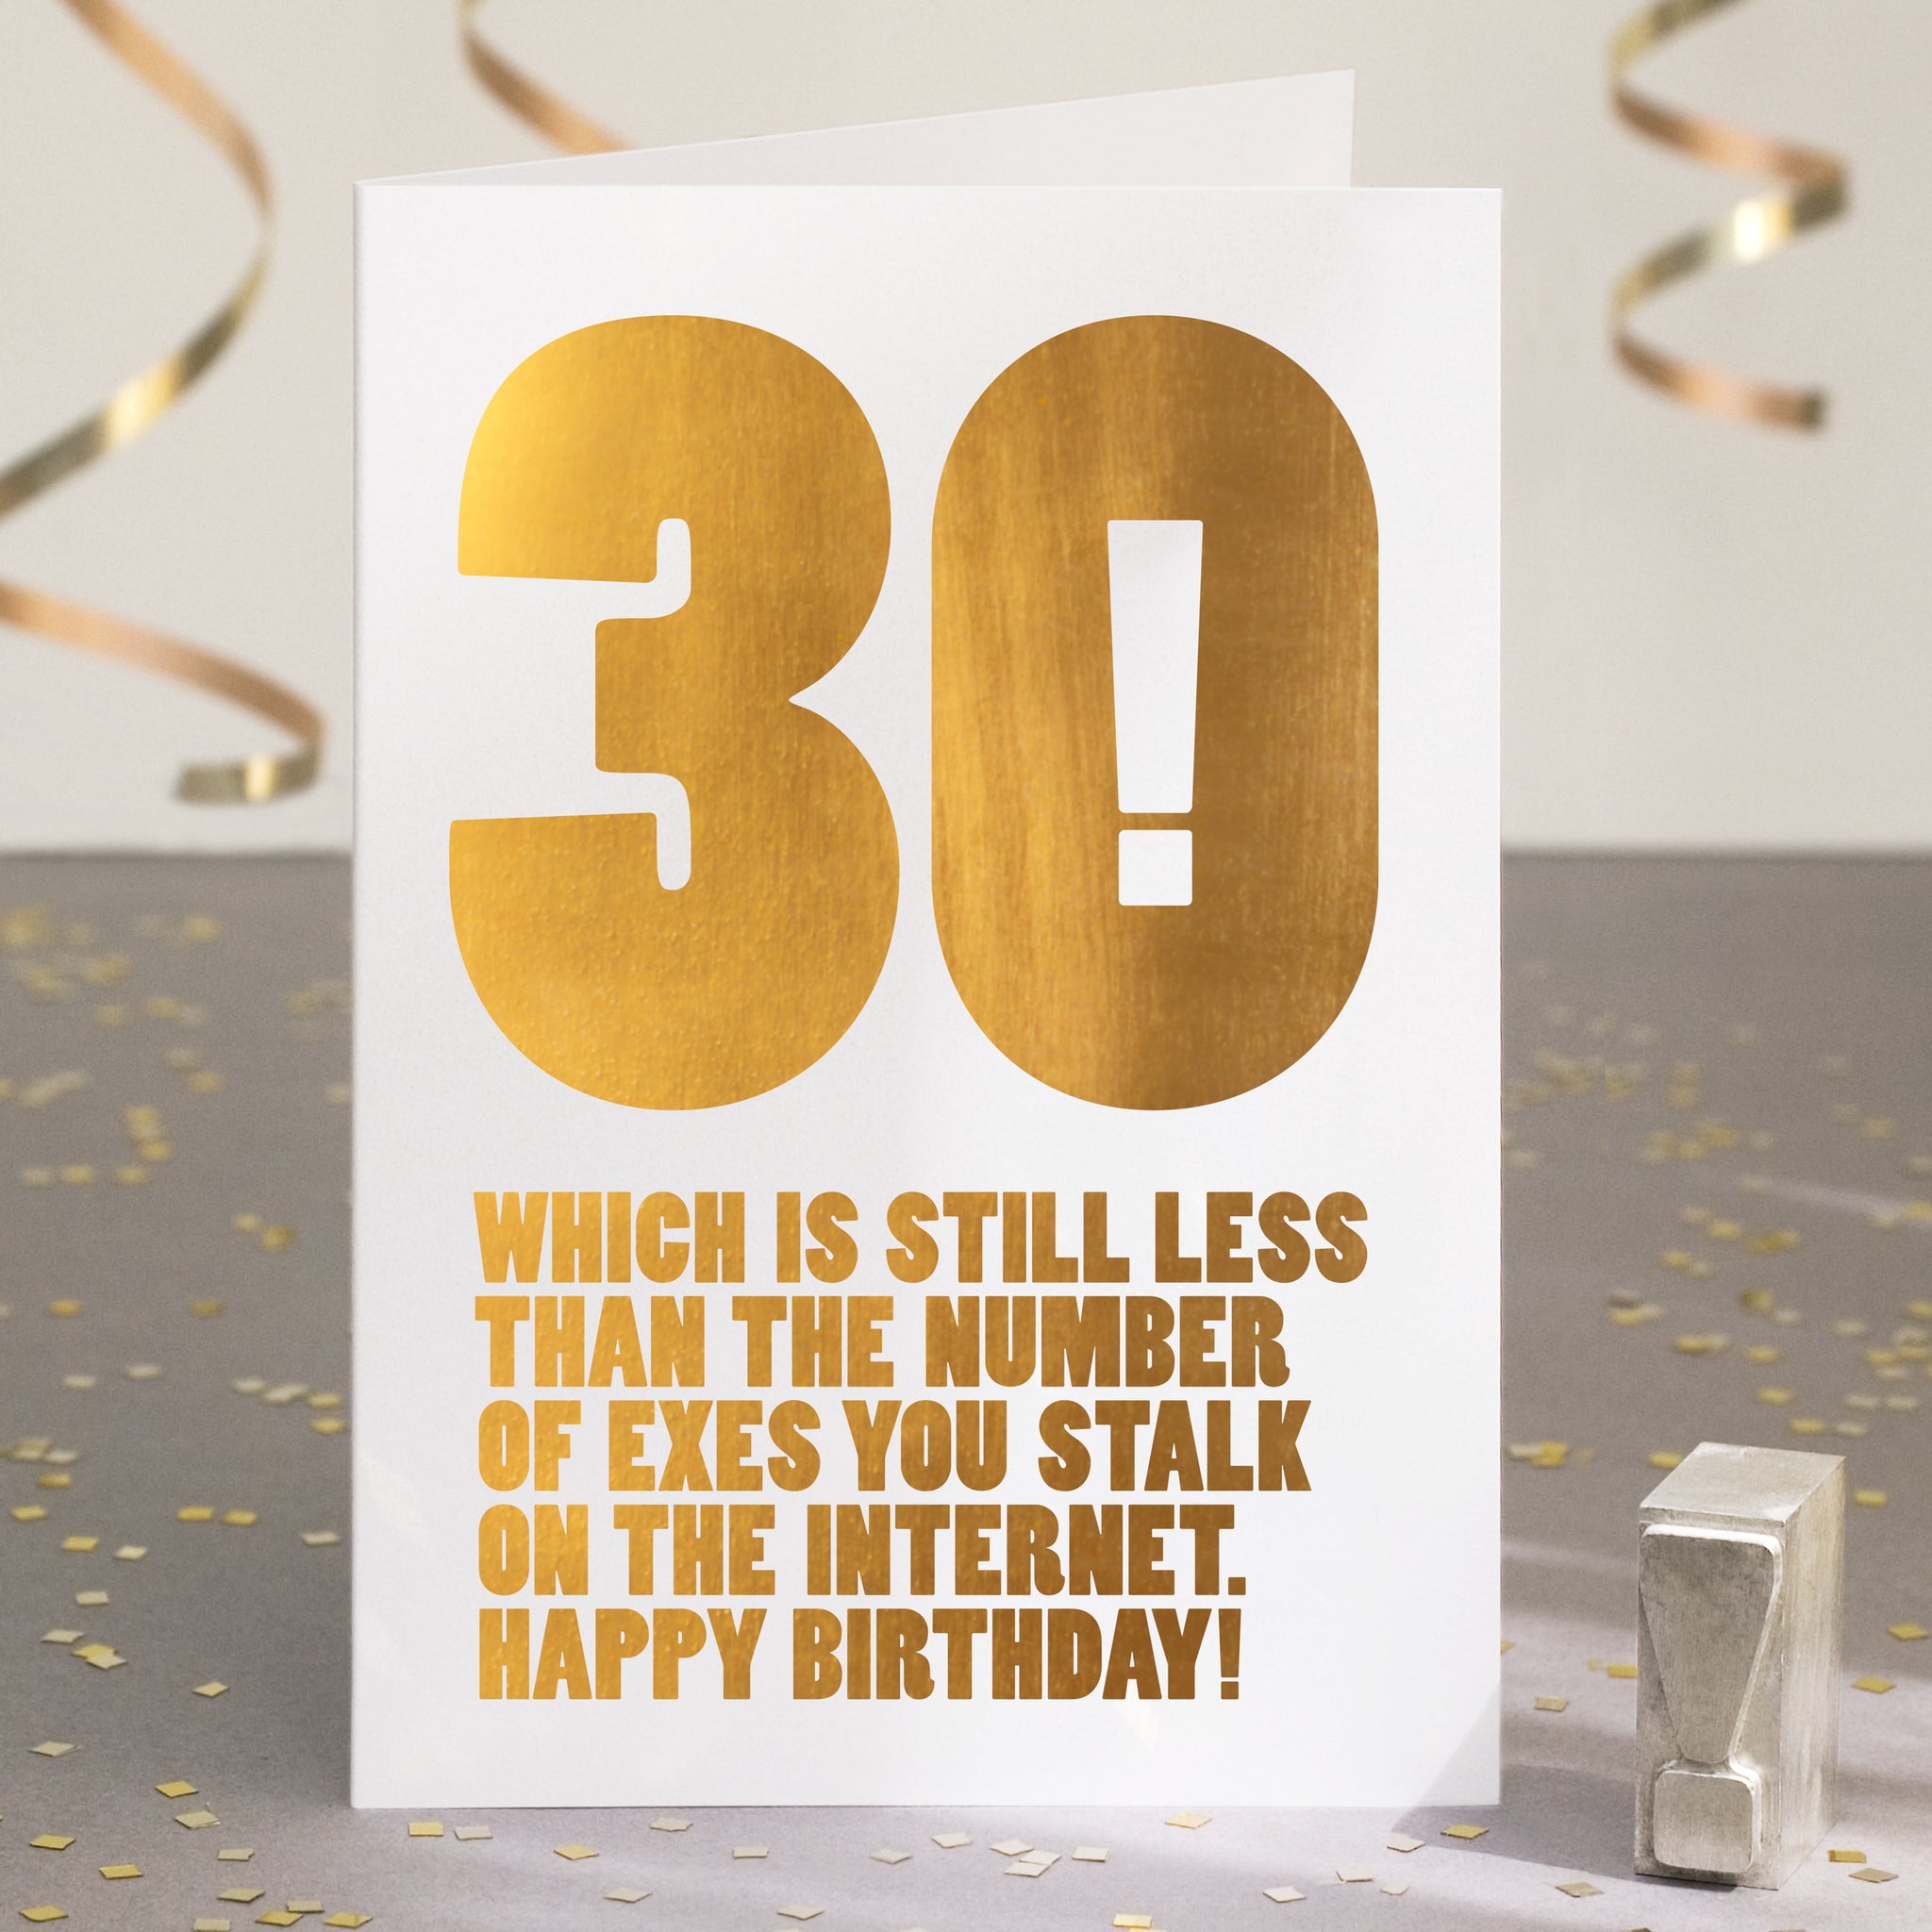 A funny 30th birthday card with the text '30, which is still less than the number of exes you stalk on the internet'.